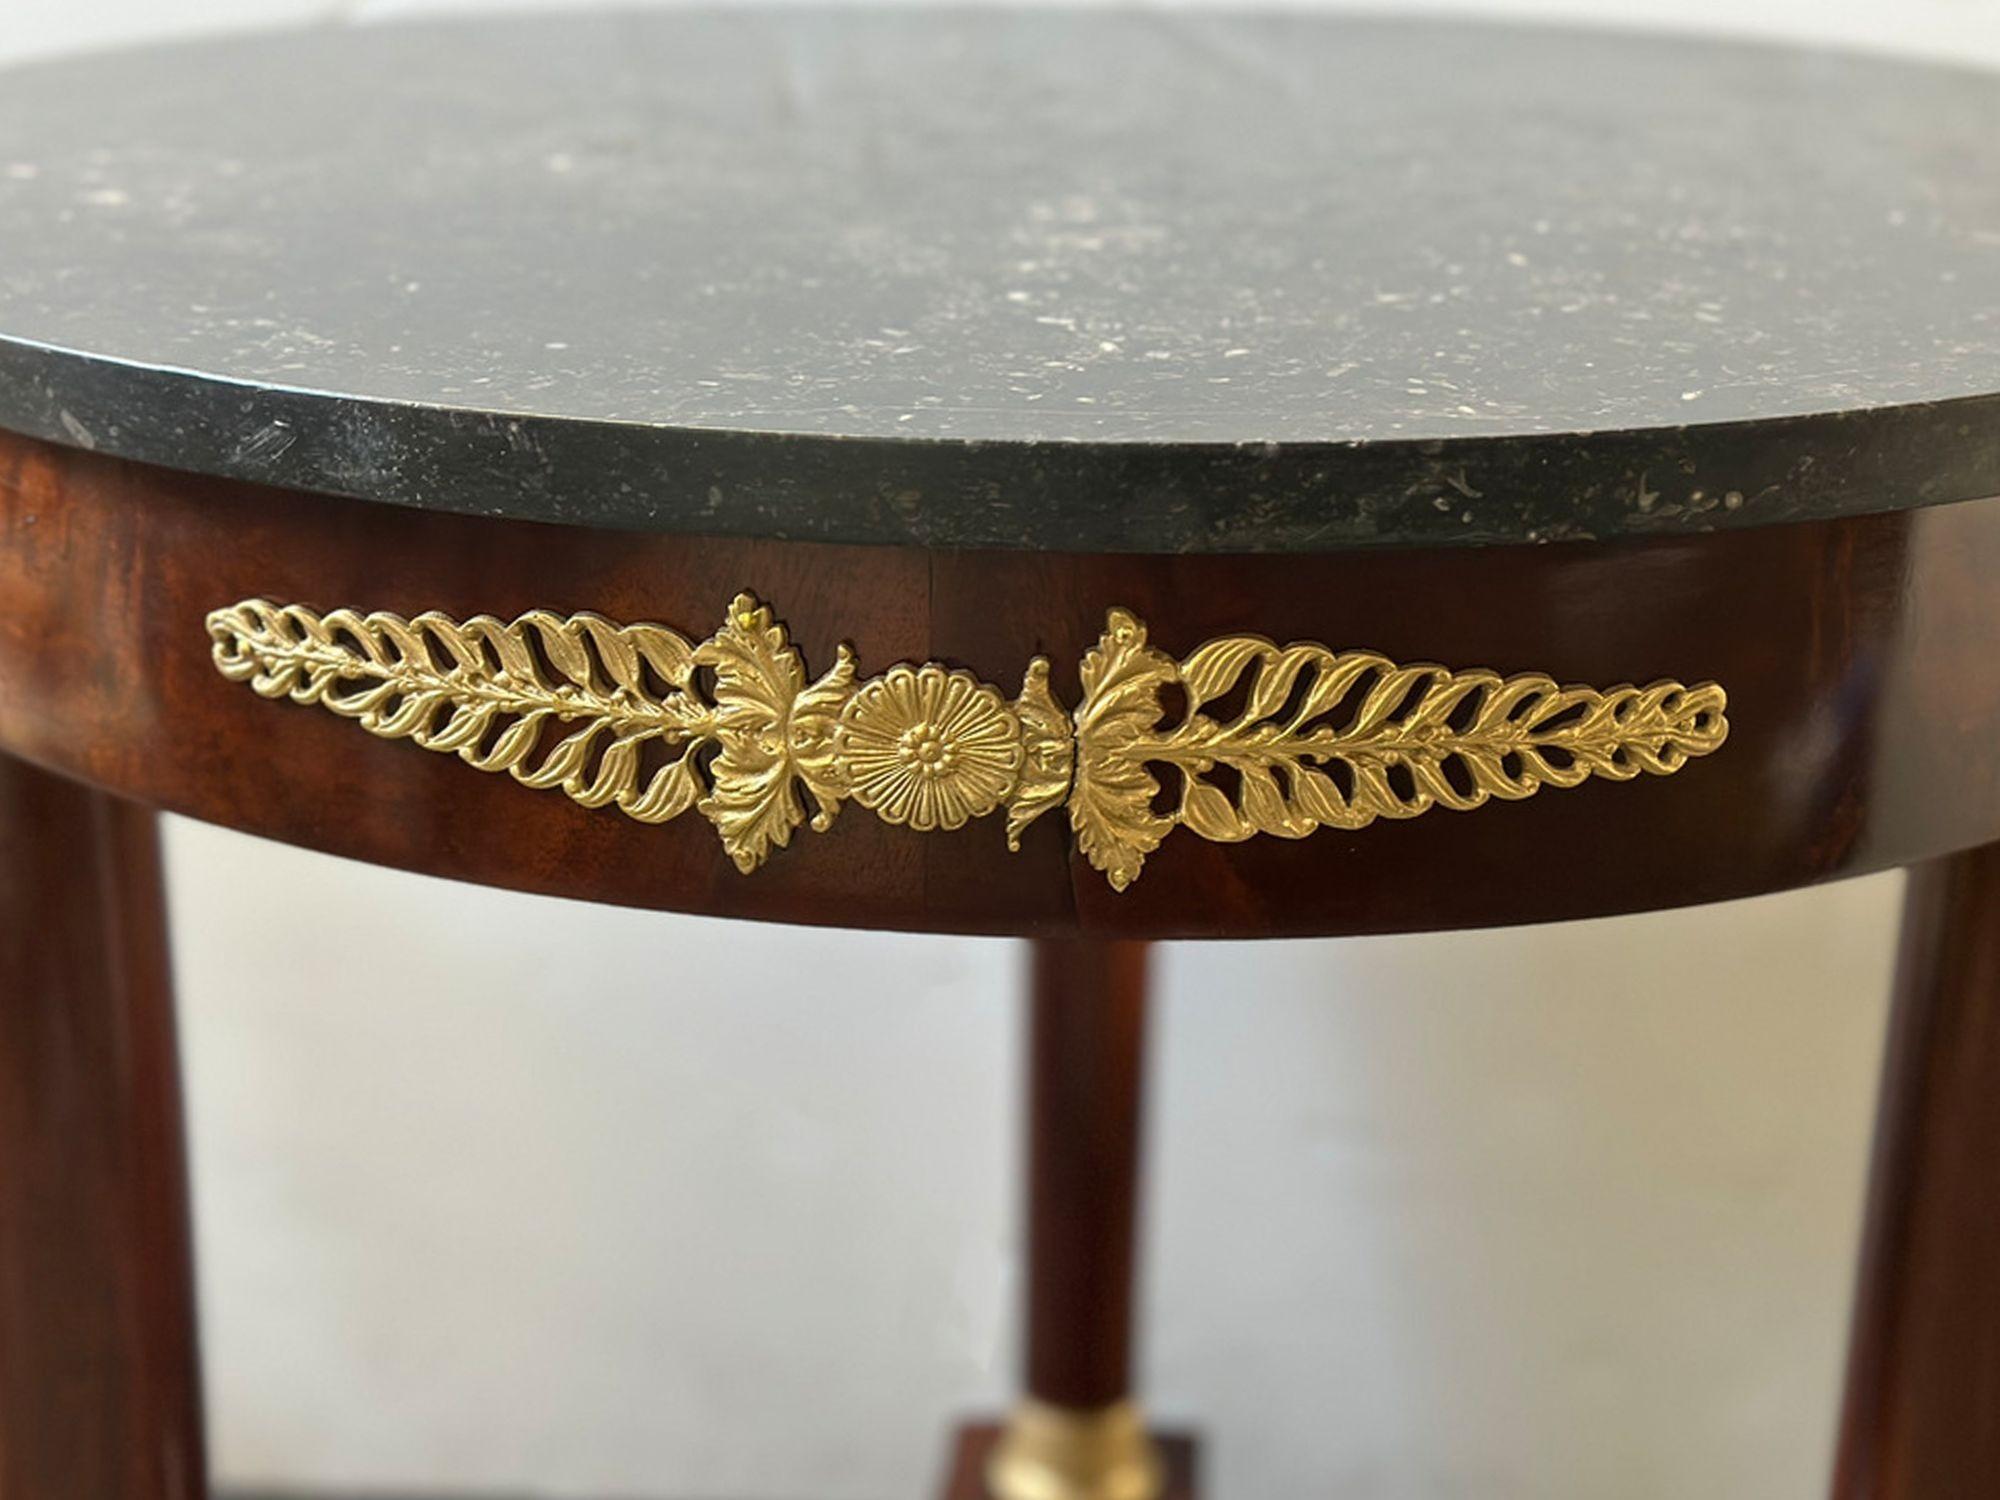 French Late 19th-Century empire style mahogany side table with marble top and bronze accents. Topping this magnificent piece is a round marble surface. The marble's natural veining and luster create a stunning contrast against the rich mahogany